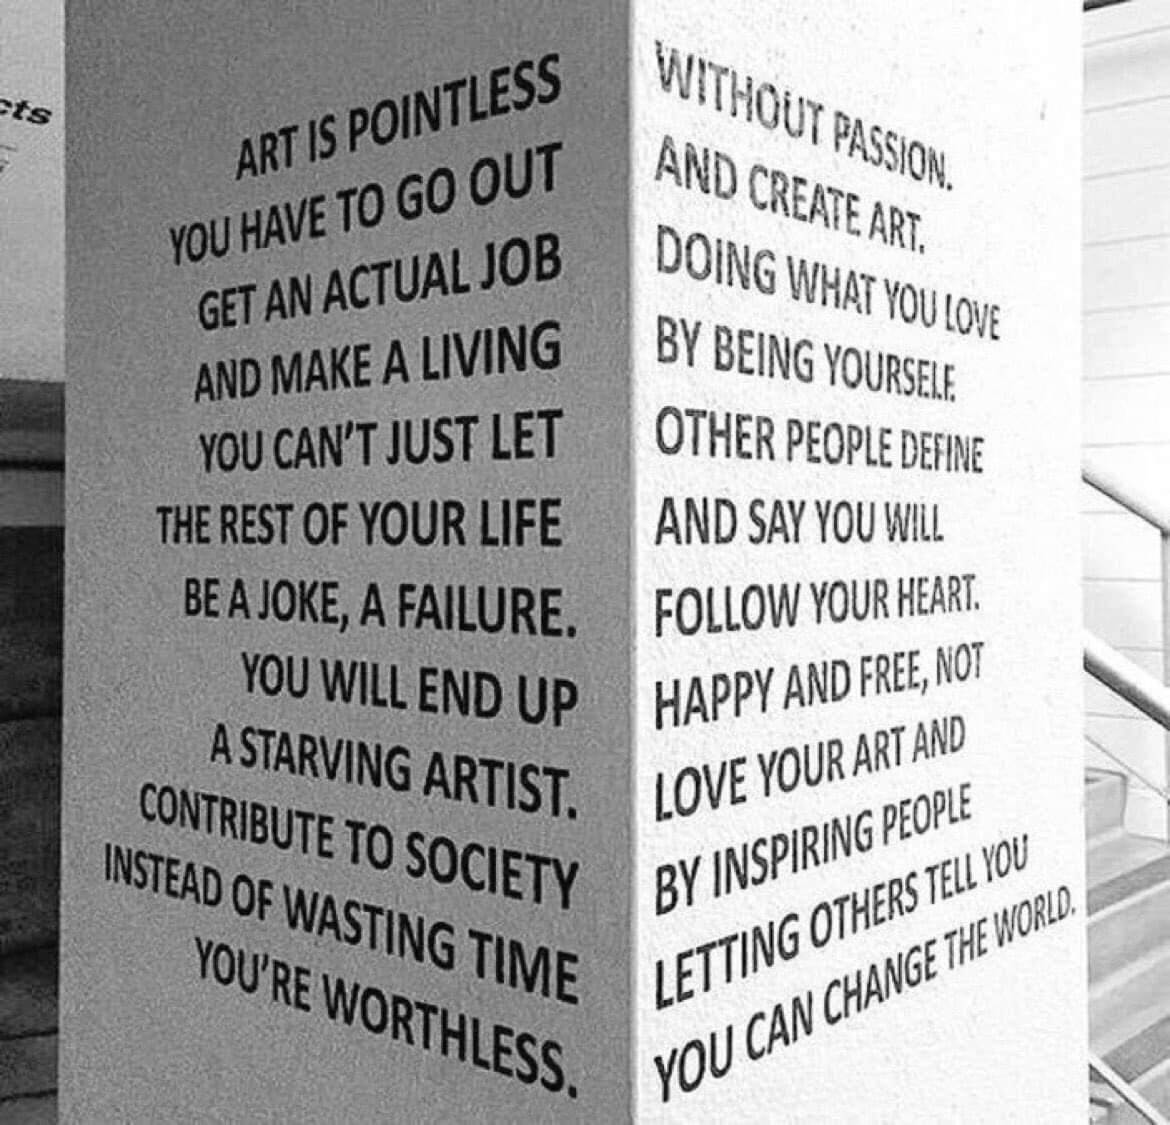 art is pointless without passion, you have to go out and create art, get an actual job doing what you love and make a living by being yourself